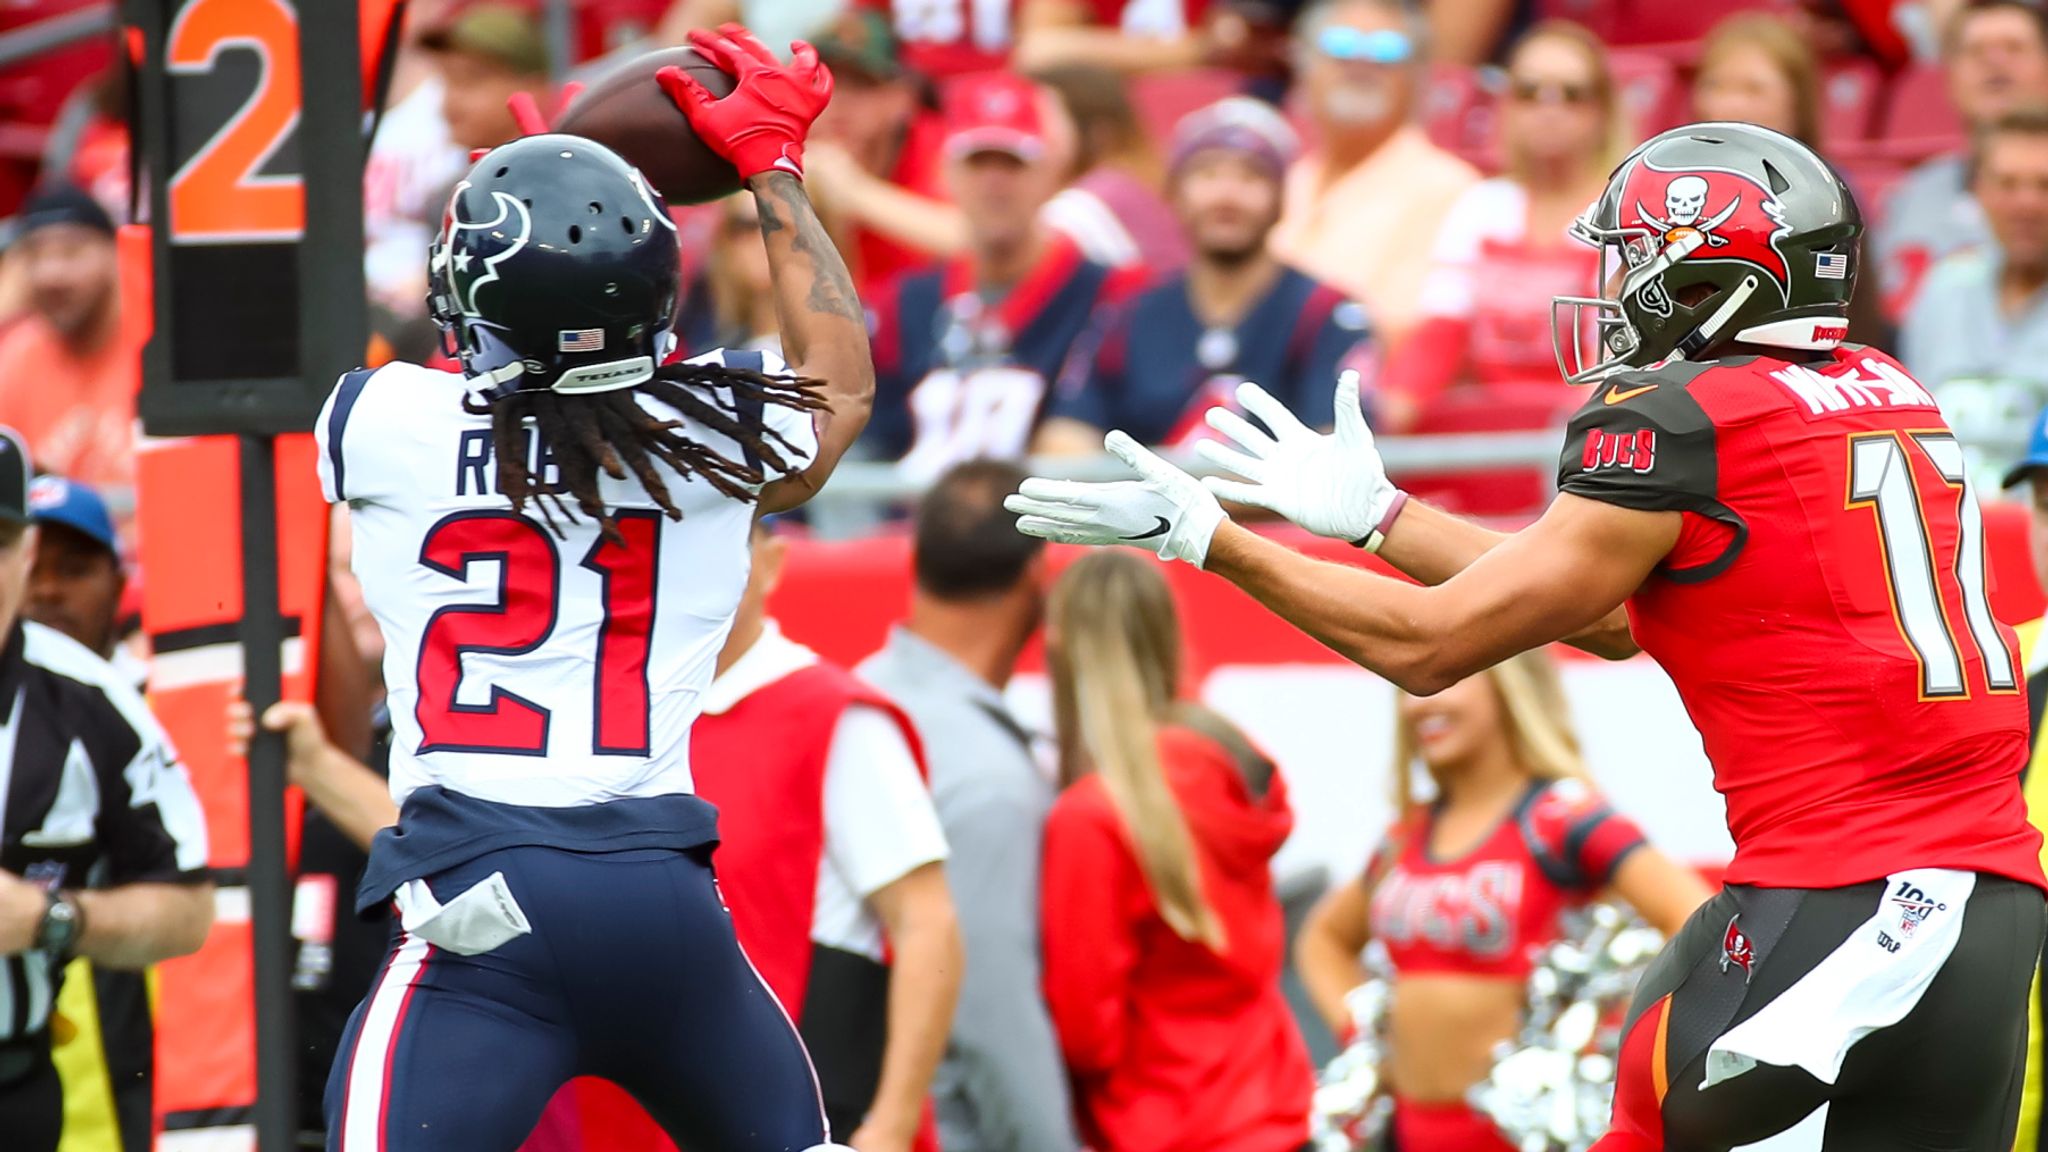 Houston Texans clinch AFC South after win over the Tampa Bay